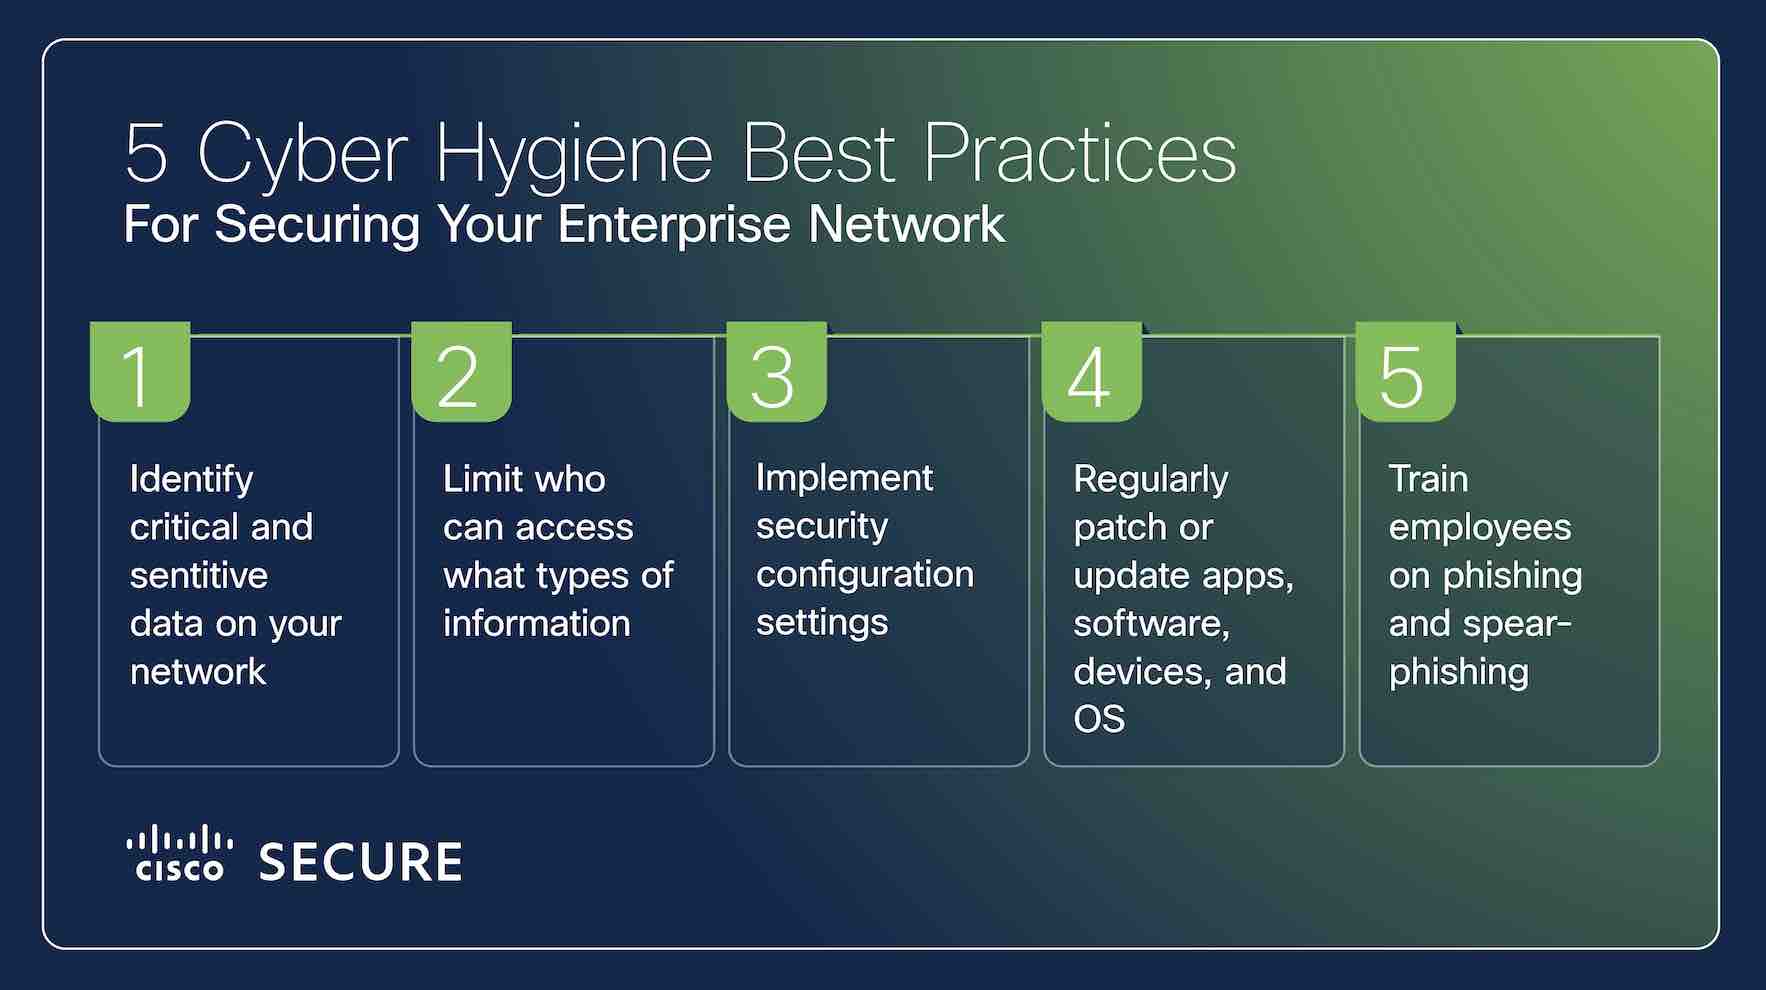 5 Cybersecurity Best Practices for securing your enterprise network. 1) Identify critical and sensitive data on your network 2) Limit who can access what types of information 3) Implement security configuration settings 4) Regularly patch or update apps, software, devices and OS 5) Train employees on phishing and spear-phishing